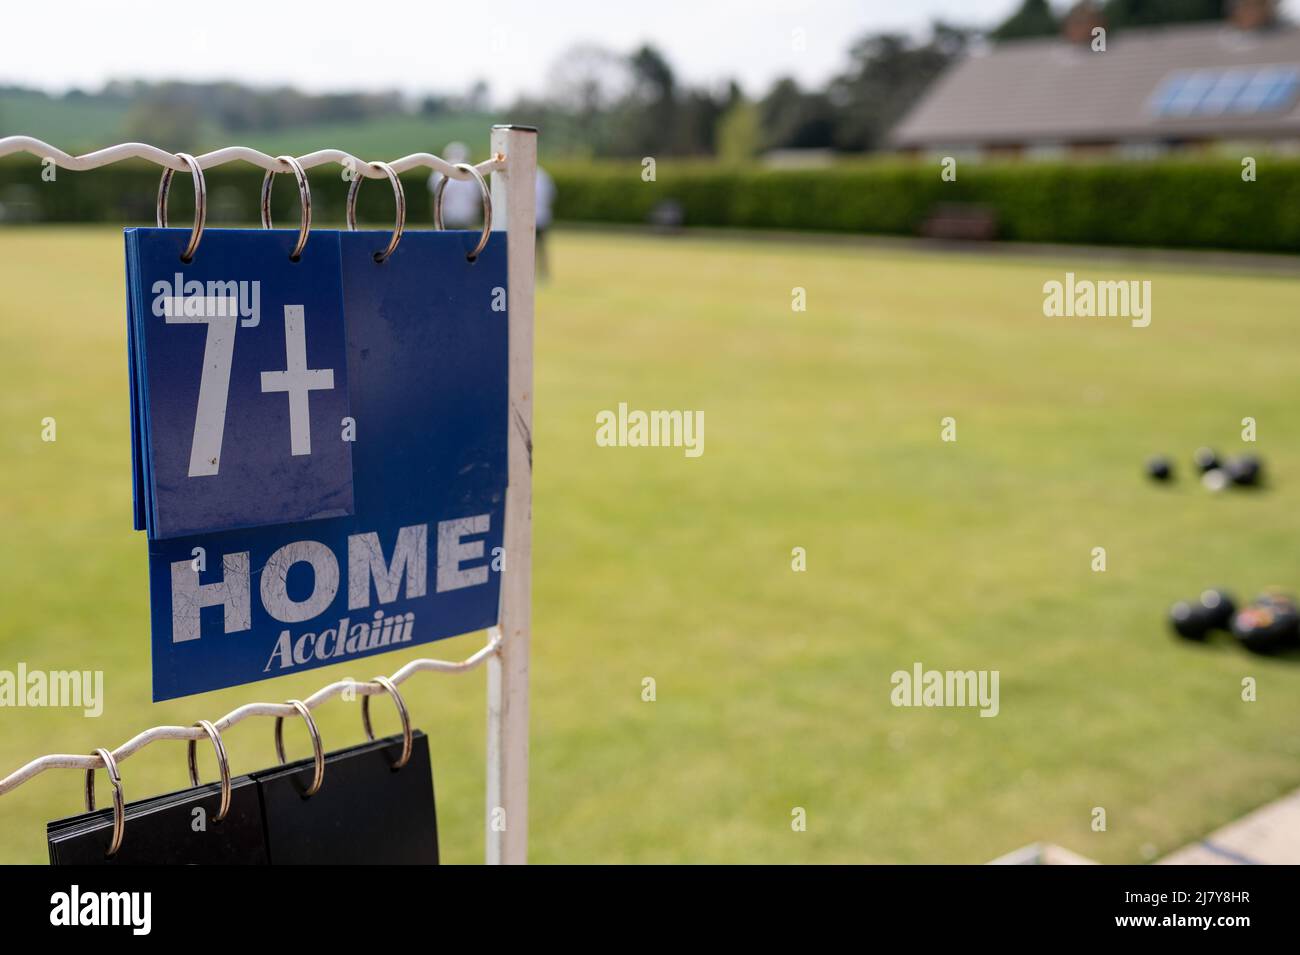 scores at Bowling on green close up low angle british summer sport uk Stock Photo